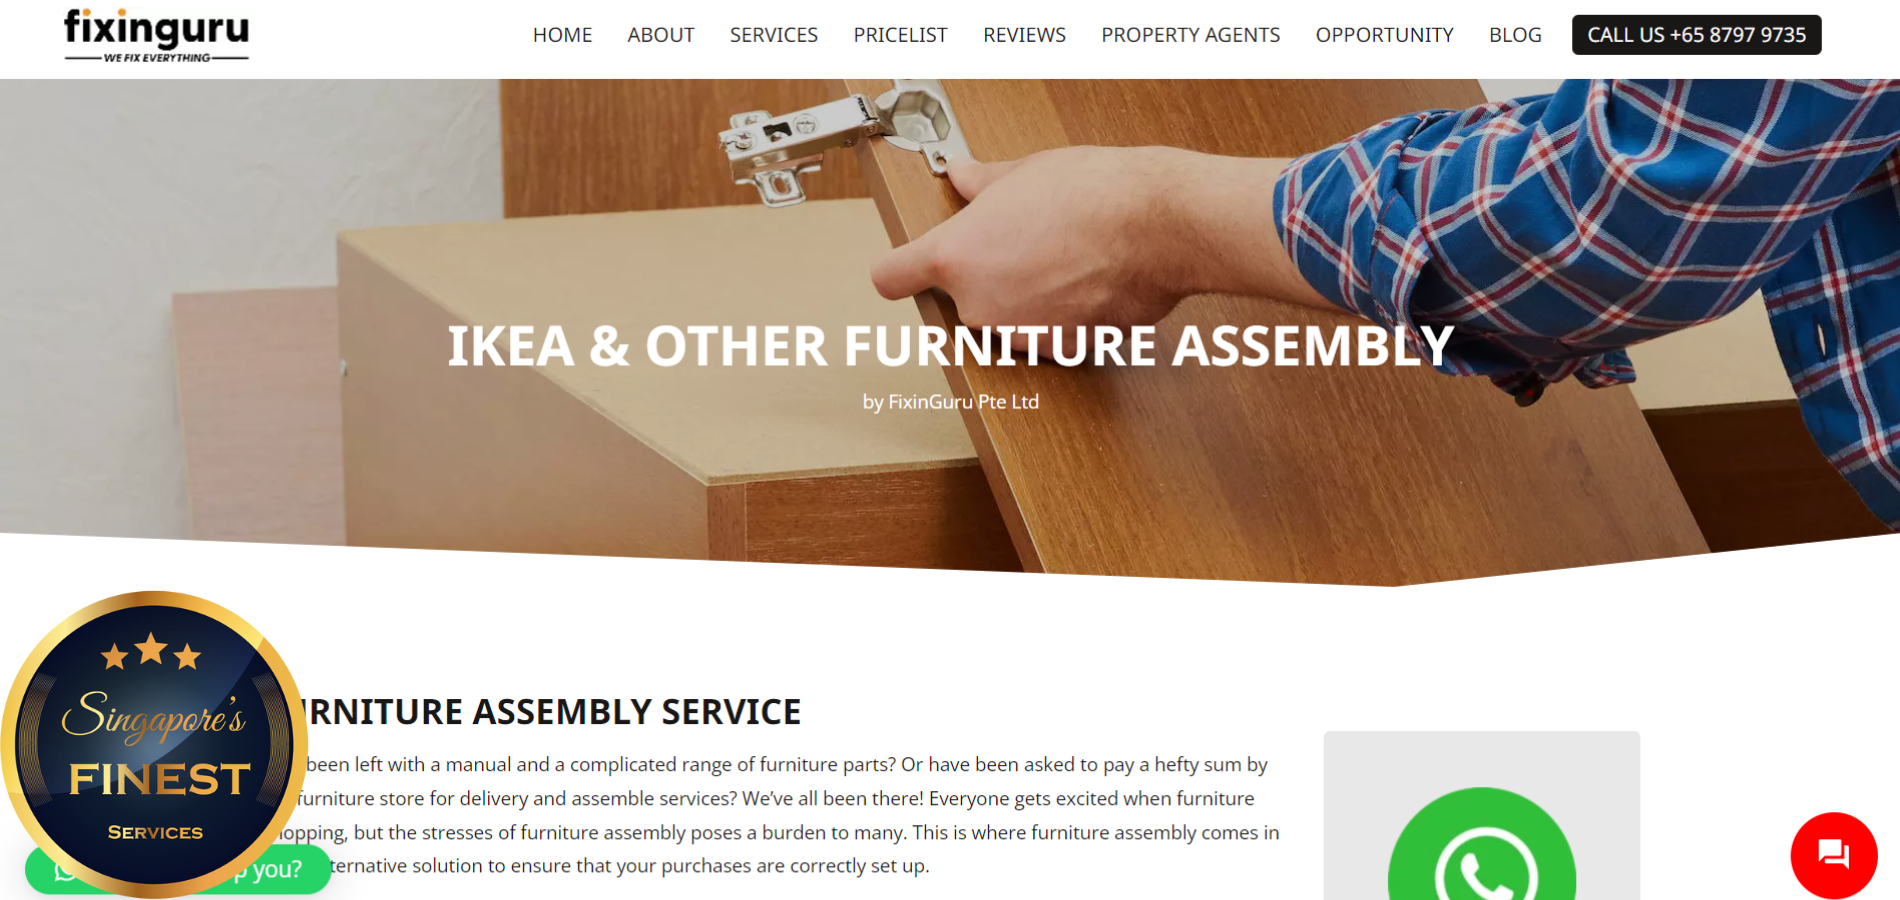 The Finest Furniture Assembly Services in Singapore